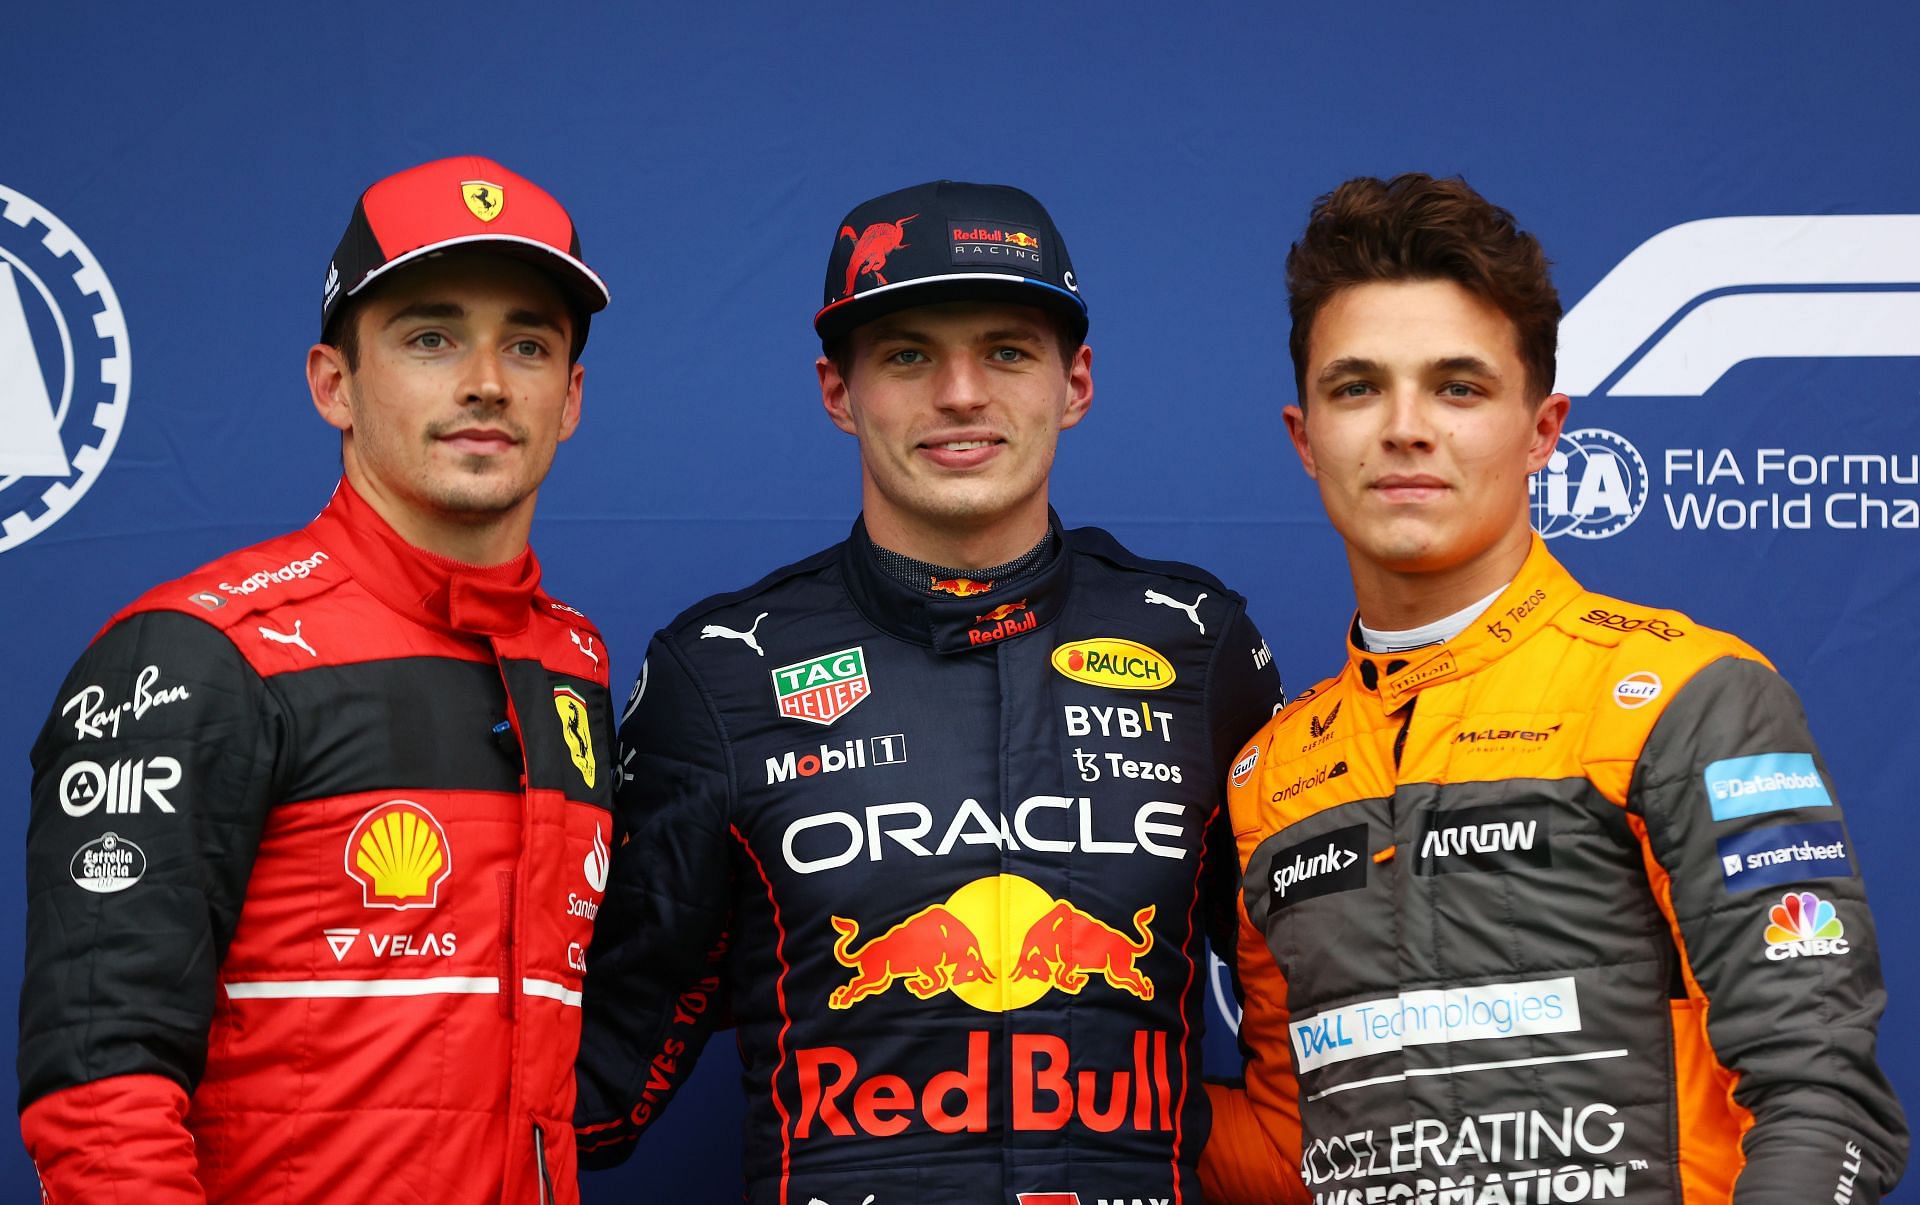 Max Verstappen (center) clinched pole position from Charles Leclerc (left) for the Imola GP sprint